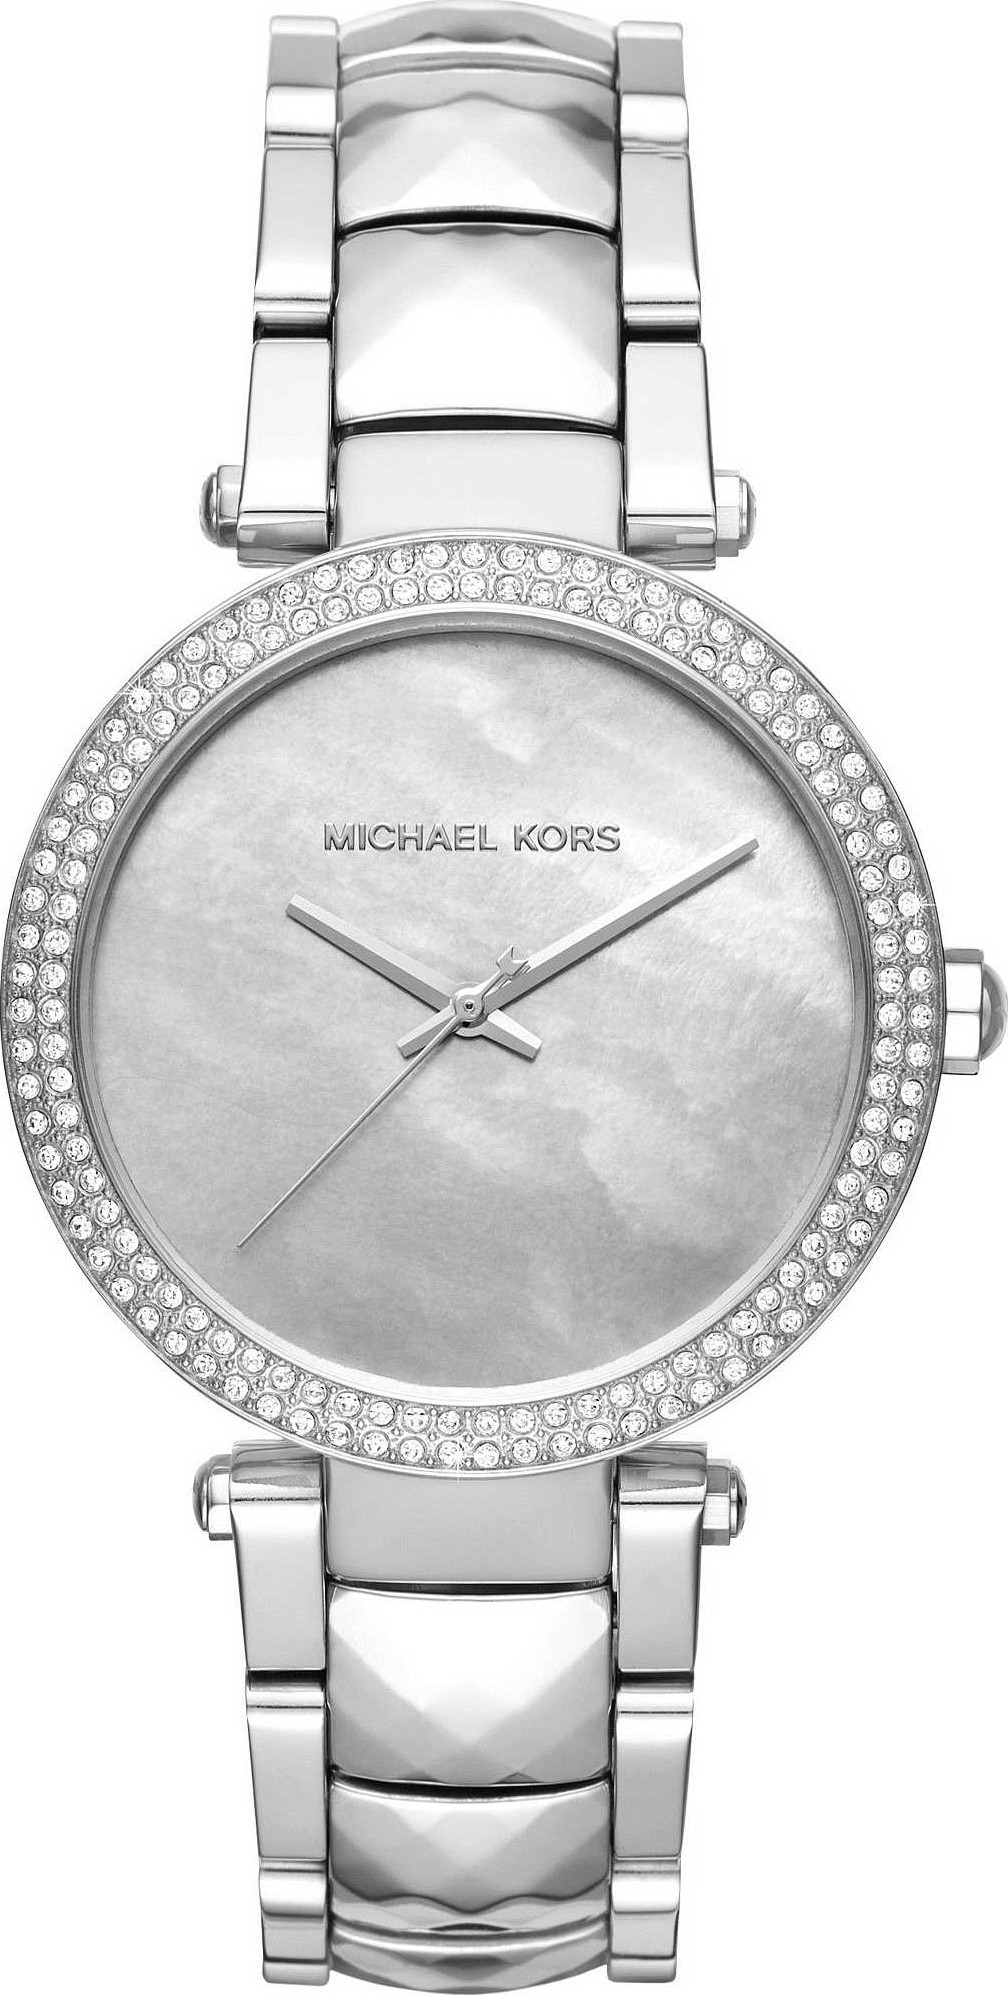 Round Michael Kors Watch For Women For Personal Use